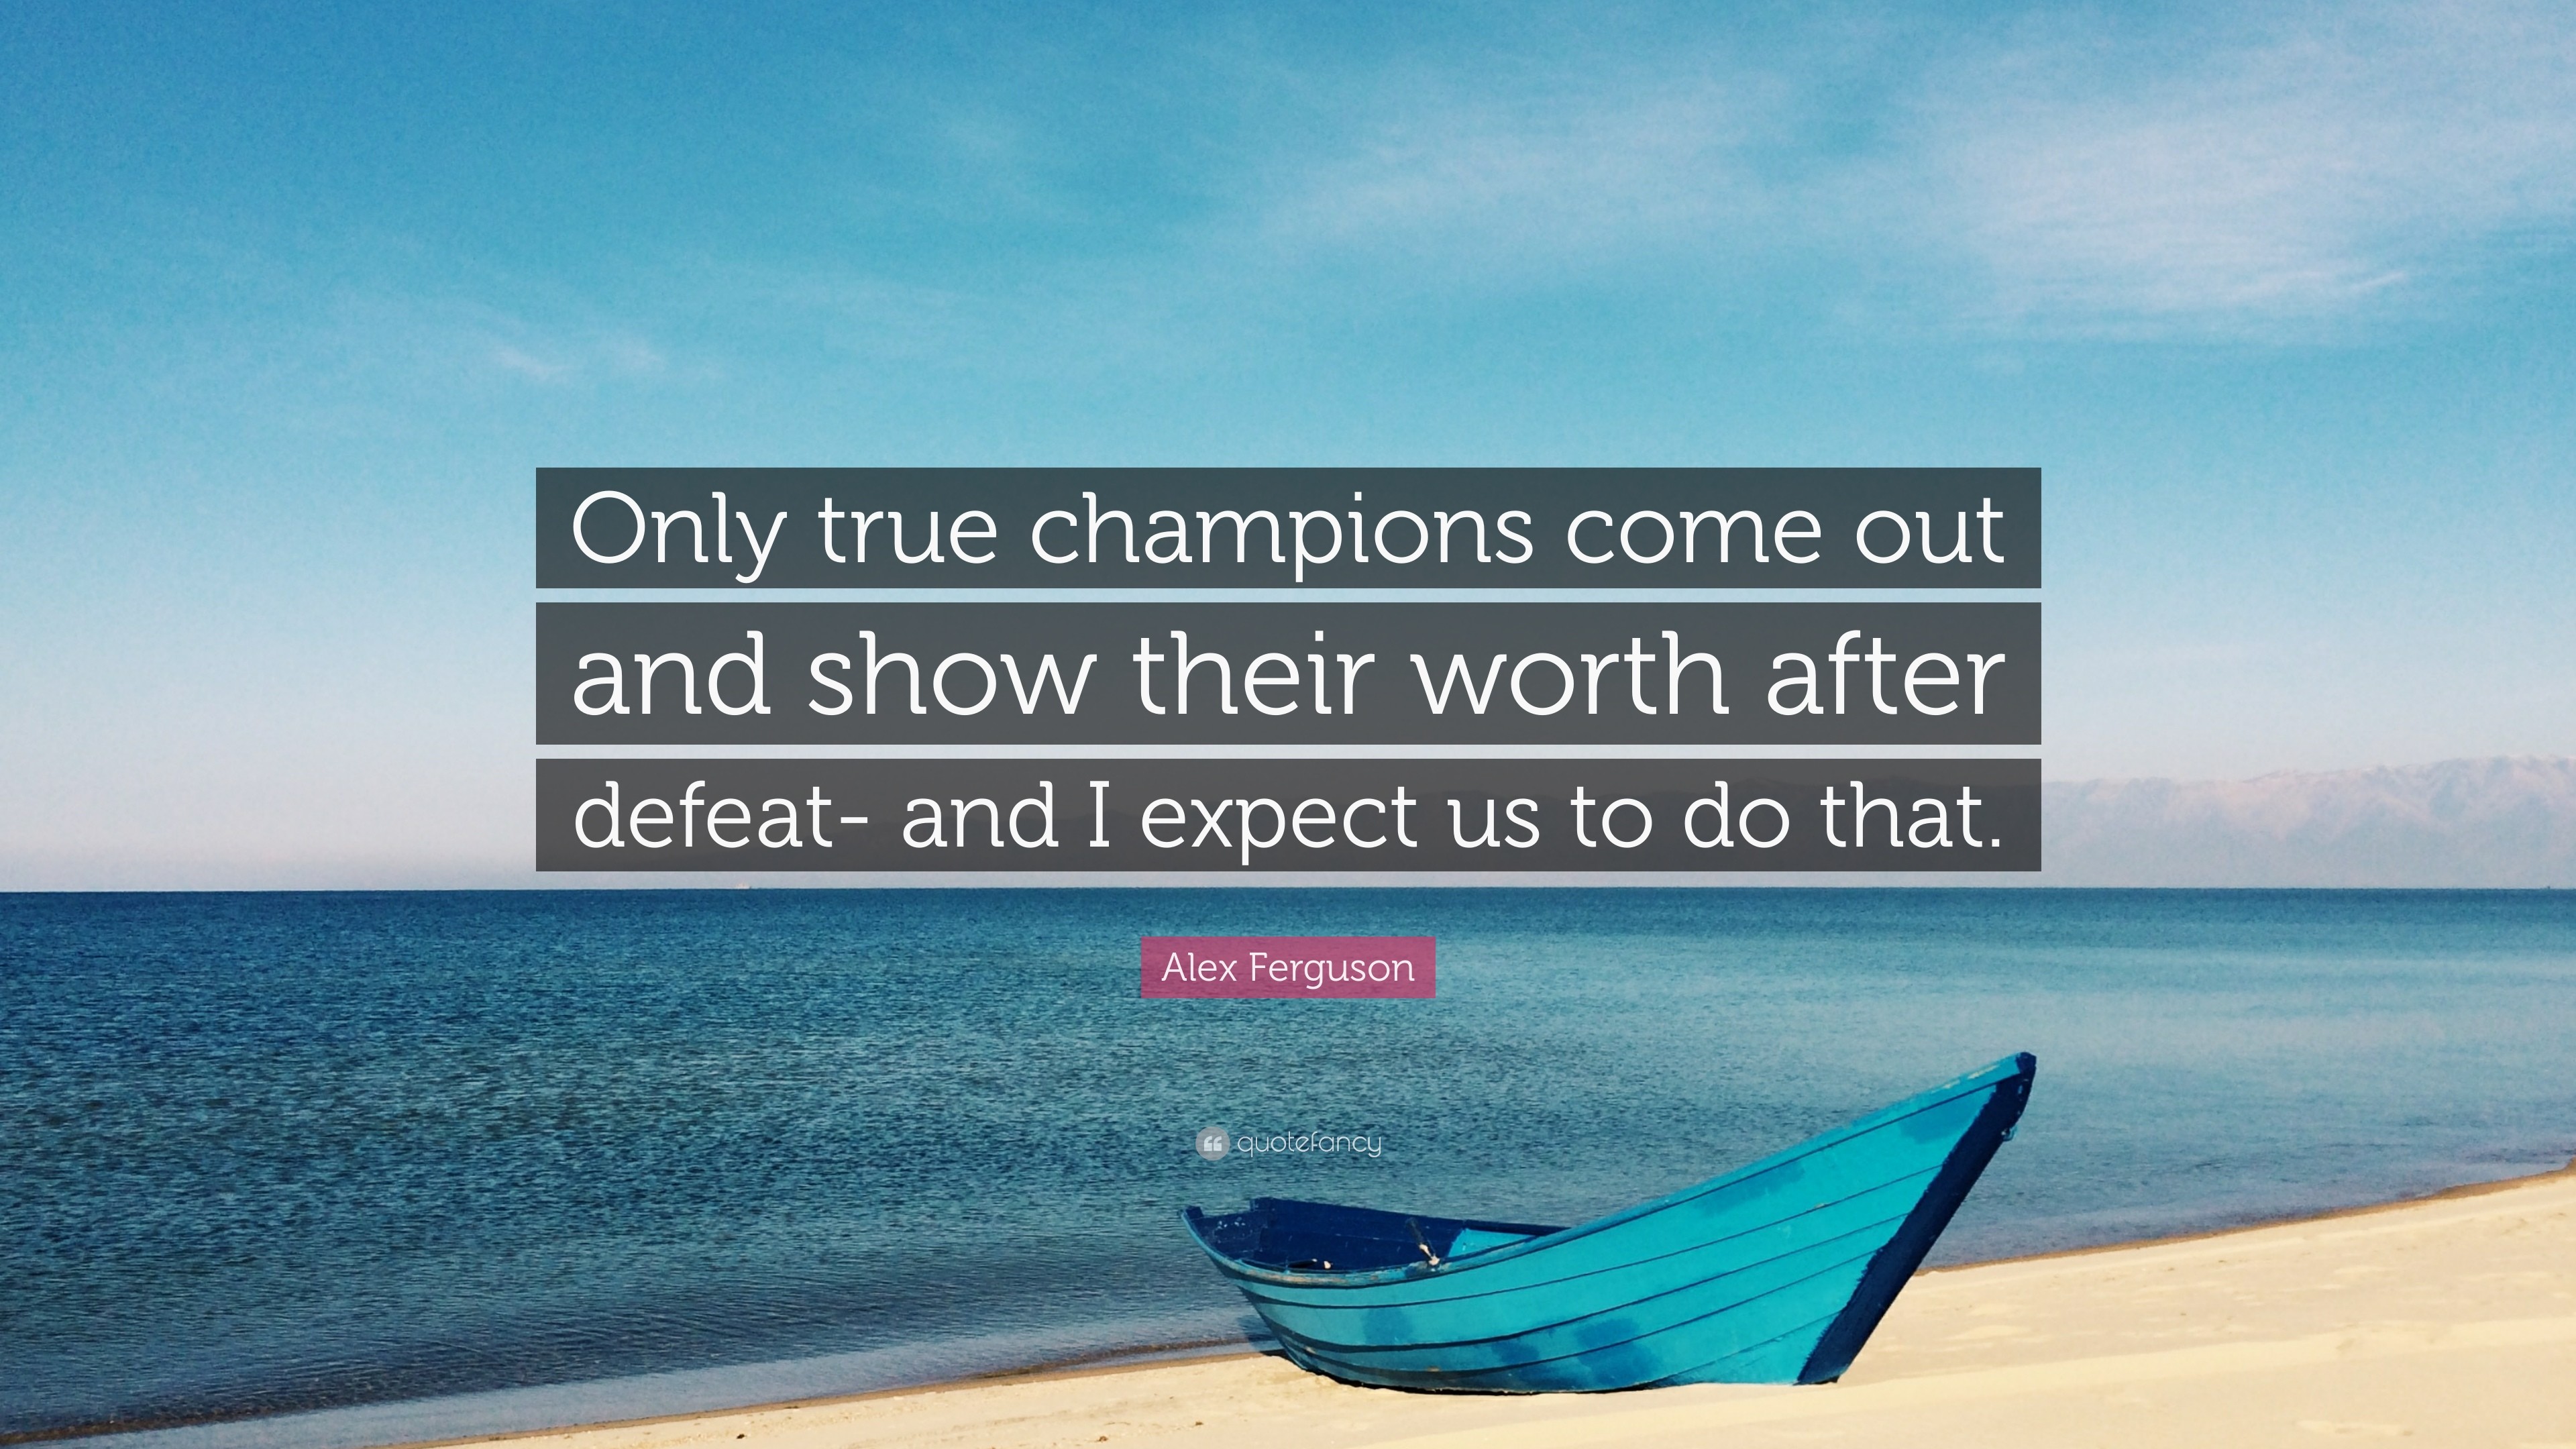 3840x2160 Alex Ferguson Quote: “Only true champions come out and show their worth  after defeat